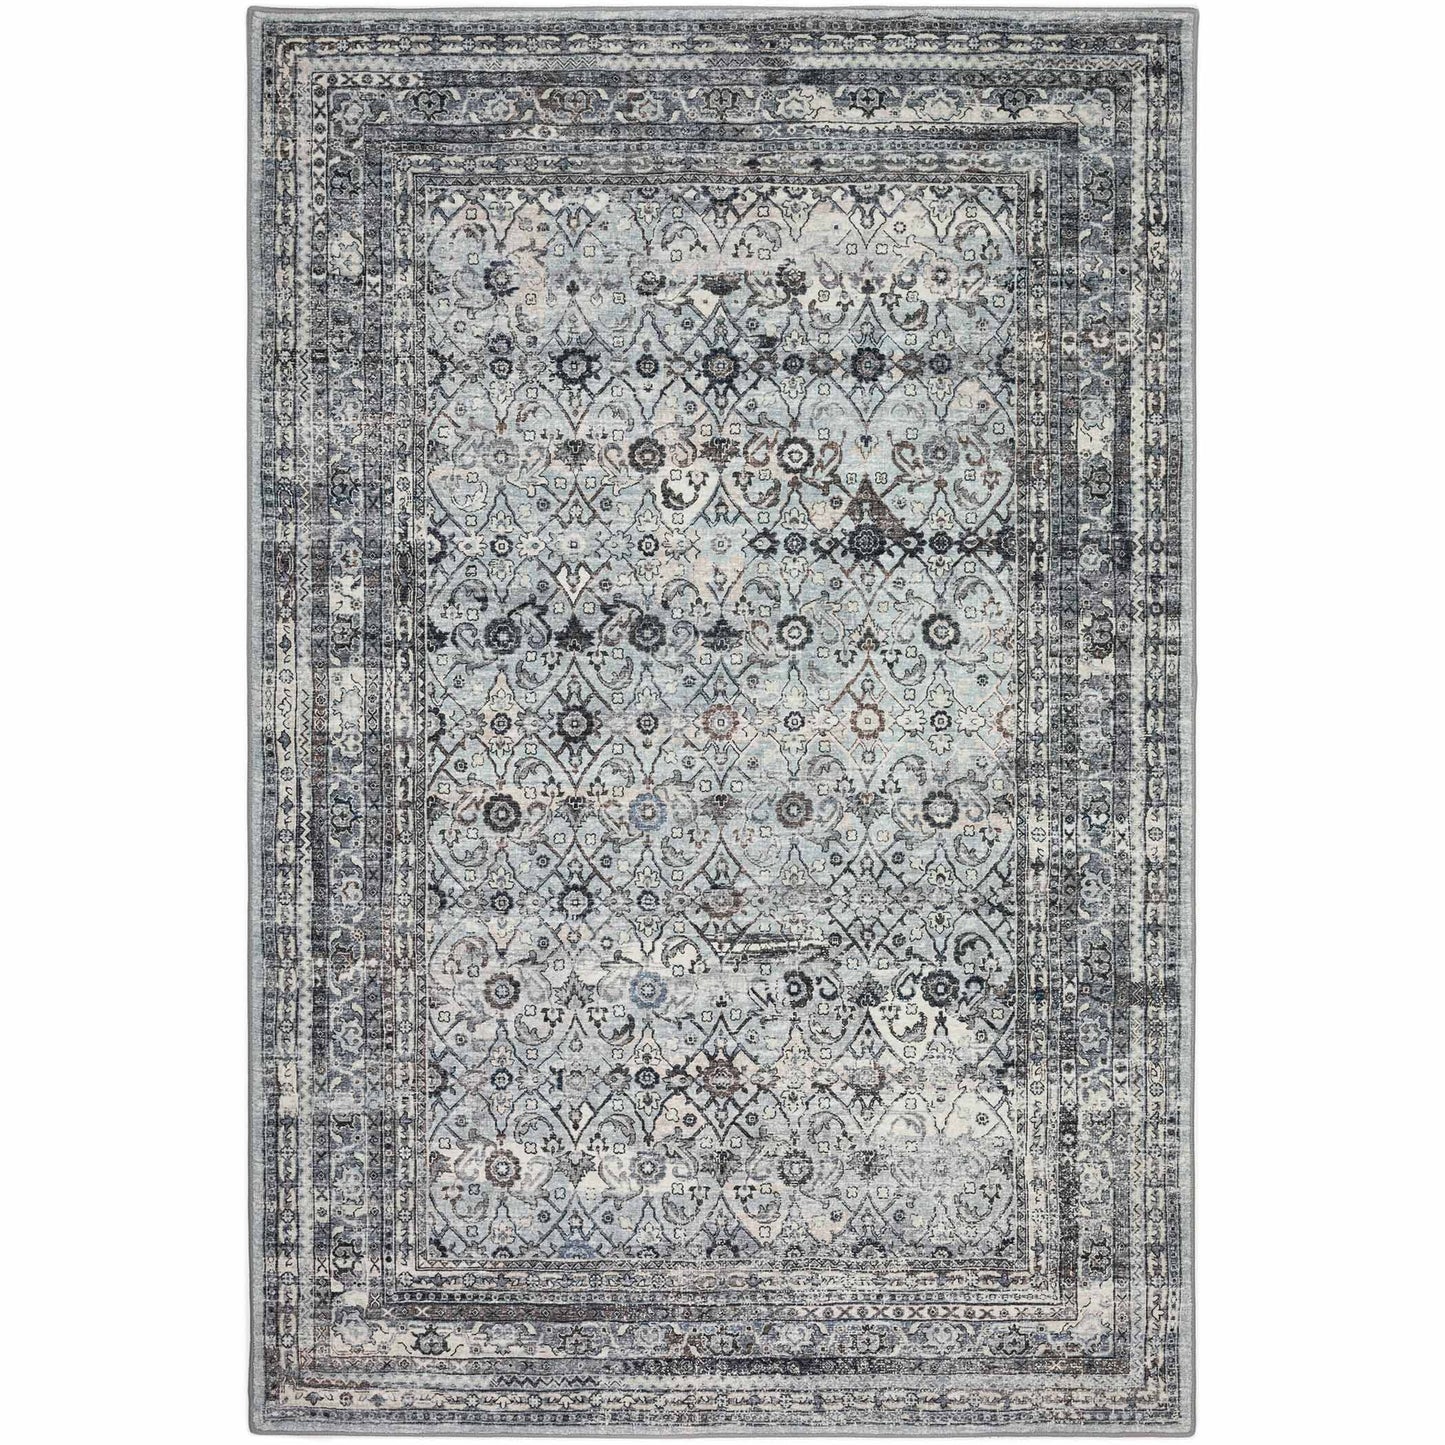 Dalyn Rugs Jericho JC7 Pewter Traditional Tufted Rug